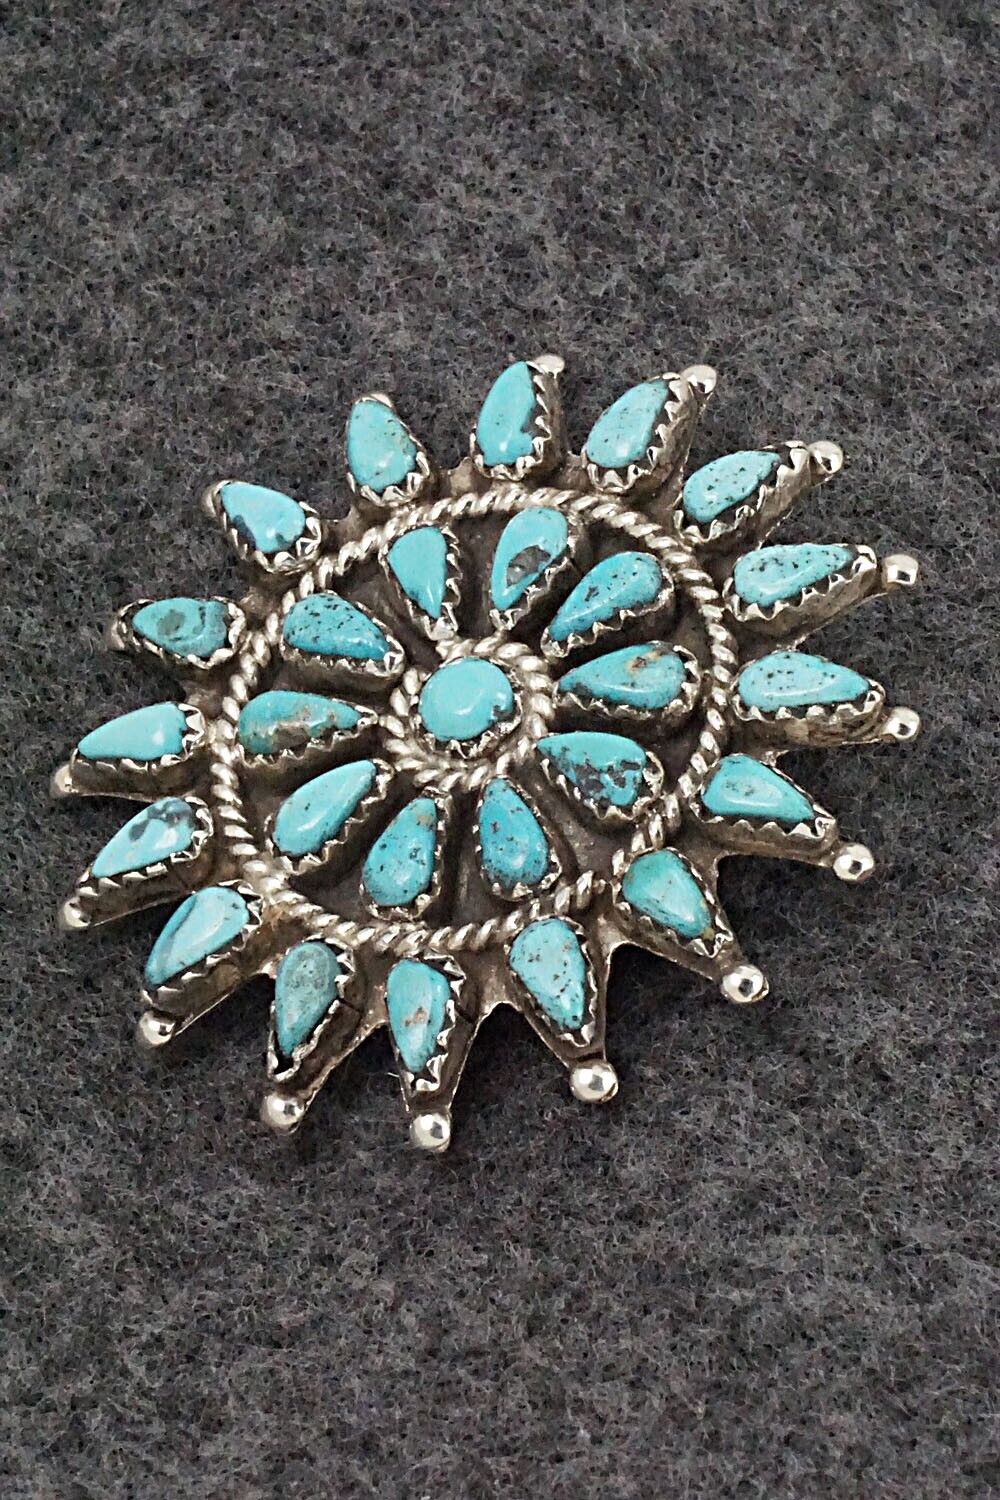 Turquoise & Sterling Silver Pendant/Pin - George Gasper